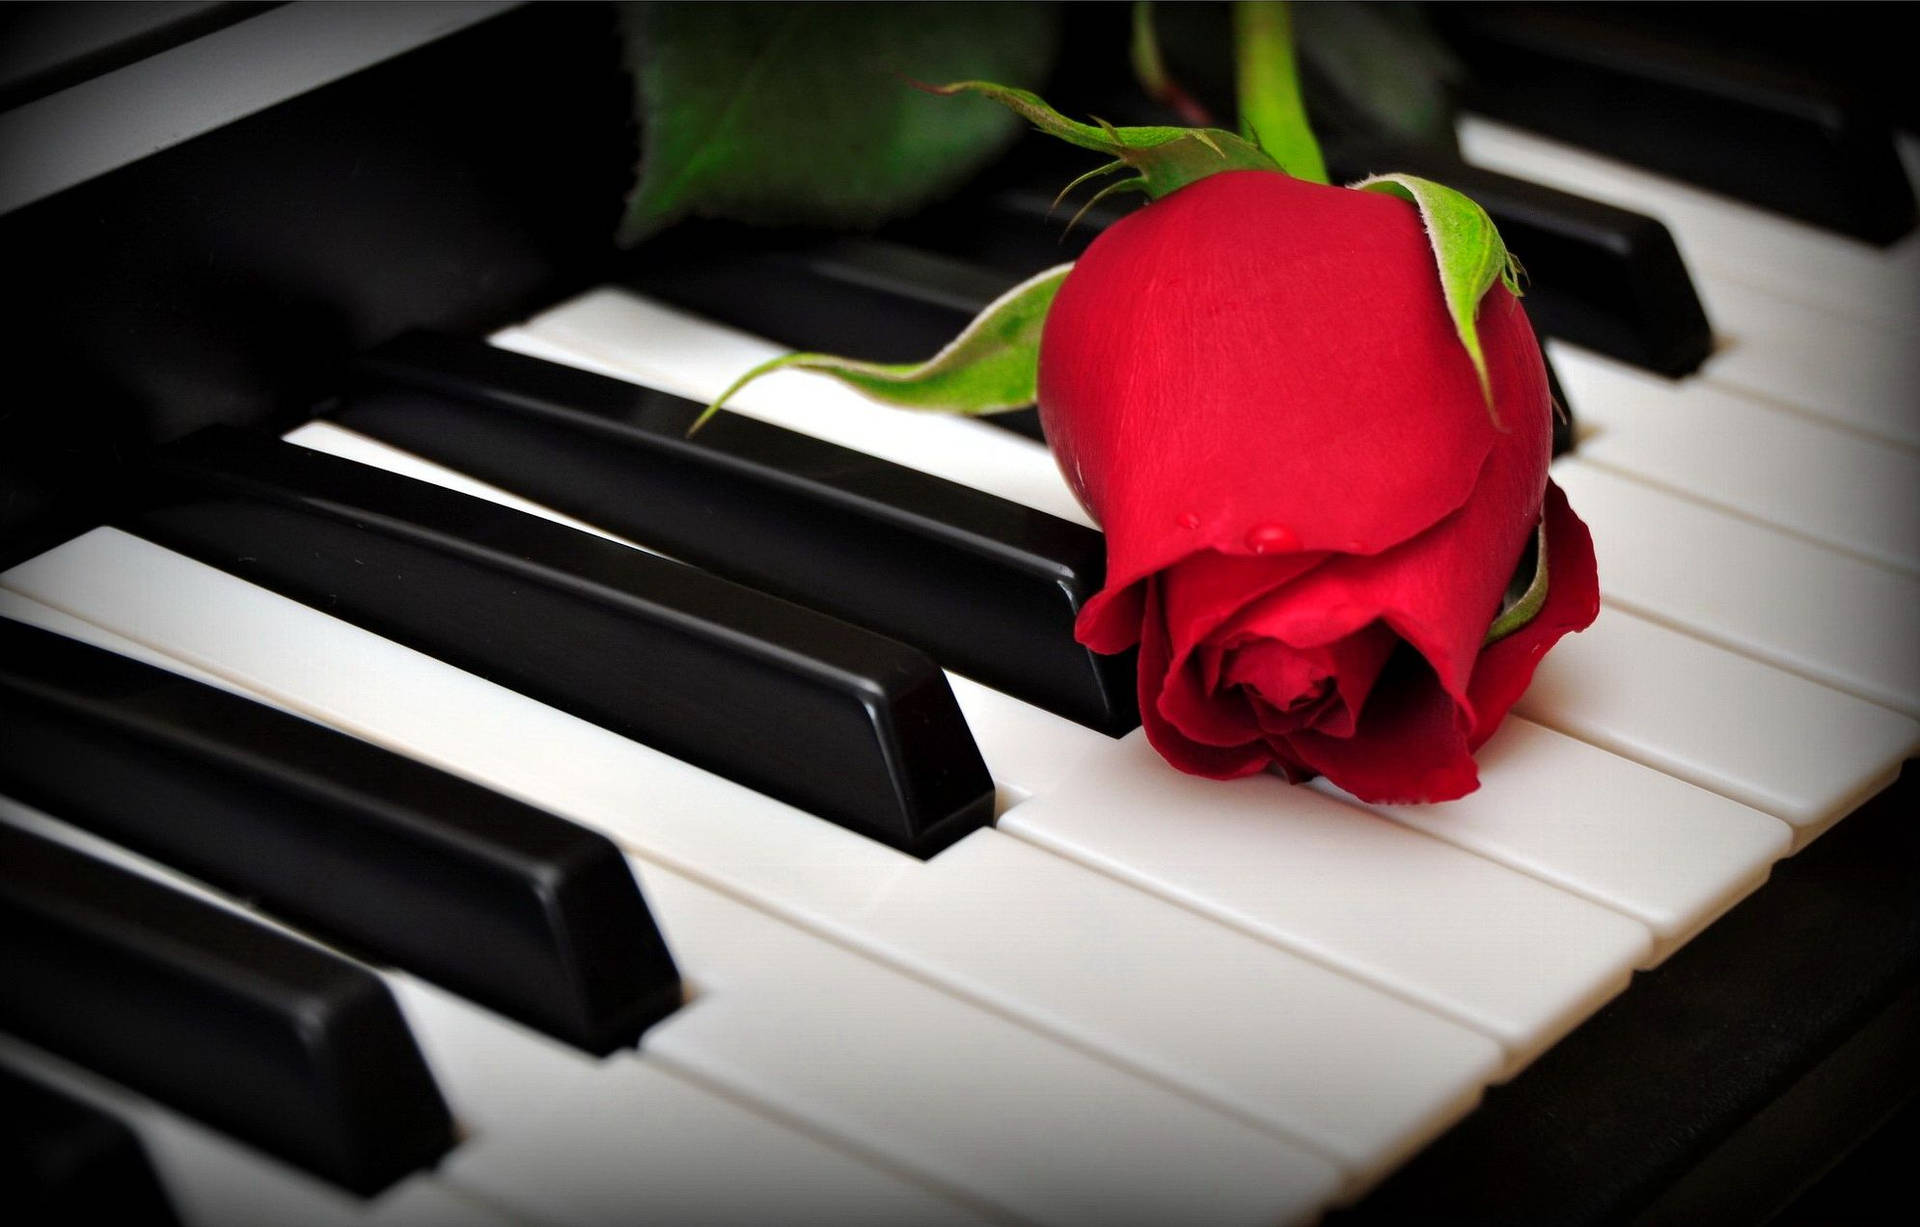 Free Piano Wallpaper Downloads, [200+] Piano Wallpapers for FREE |  